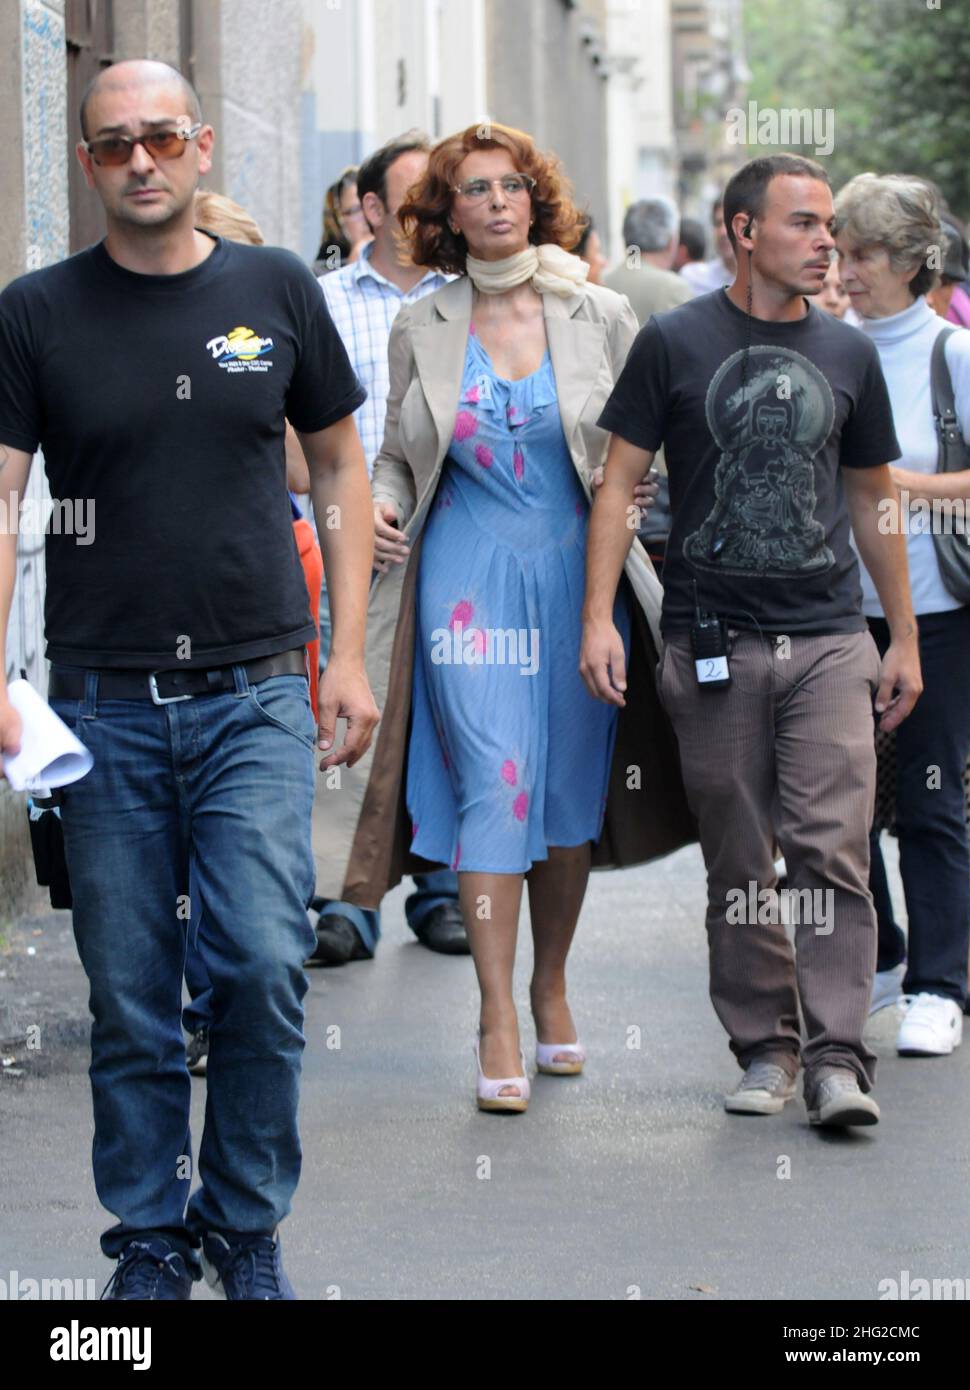 ©Eddy / lapresse 25-09-2009 Rome, Italy It is shooting the film 'Una Casa Piena di Specchi '(A house full of mirrors): the filmÍs protagonist is Sophia Loren, who plays the role of Romilda Villani that is SophiaÍs mother. In the pictures, we can see her to direct on the set together with the actor Enzo De Caro, who plays the role of RomildaÍs husband; then while preparing themselves to shoot a scene.   ©Eddy / lapresse 25-09-2009 Roma, Italia spettacolo Sophia Loren sul set del film 'Una casa piena di specchi' Interprete principale Sophia Loren, che interpreta la parte di sua madre Romilda Vil Stock Photo